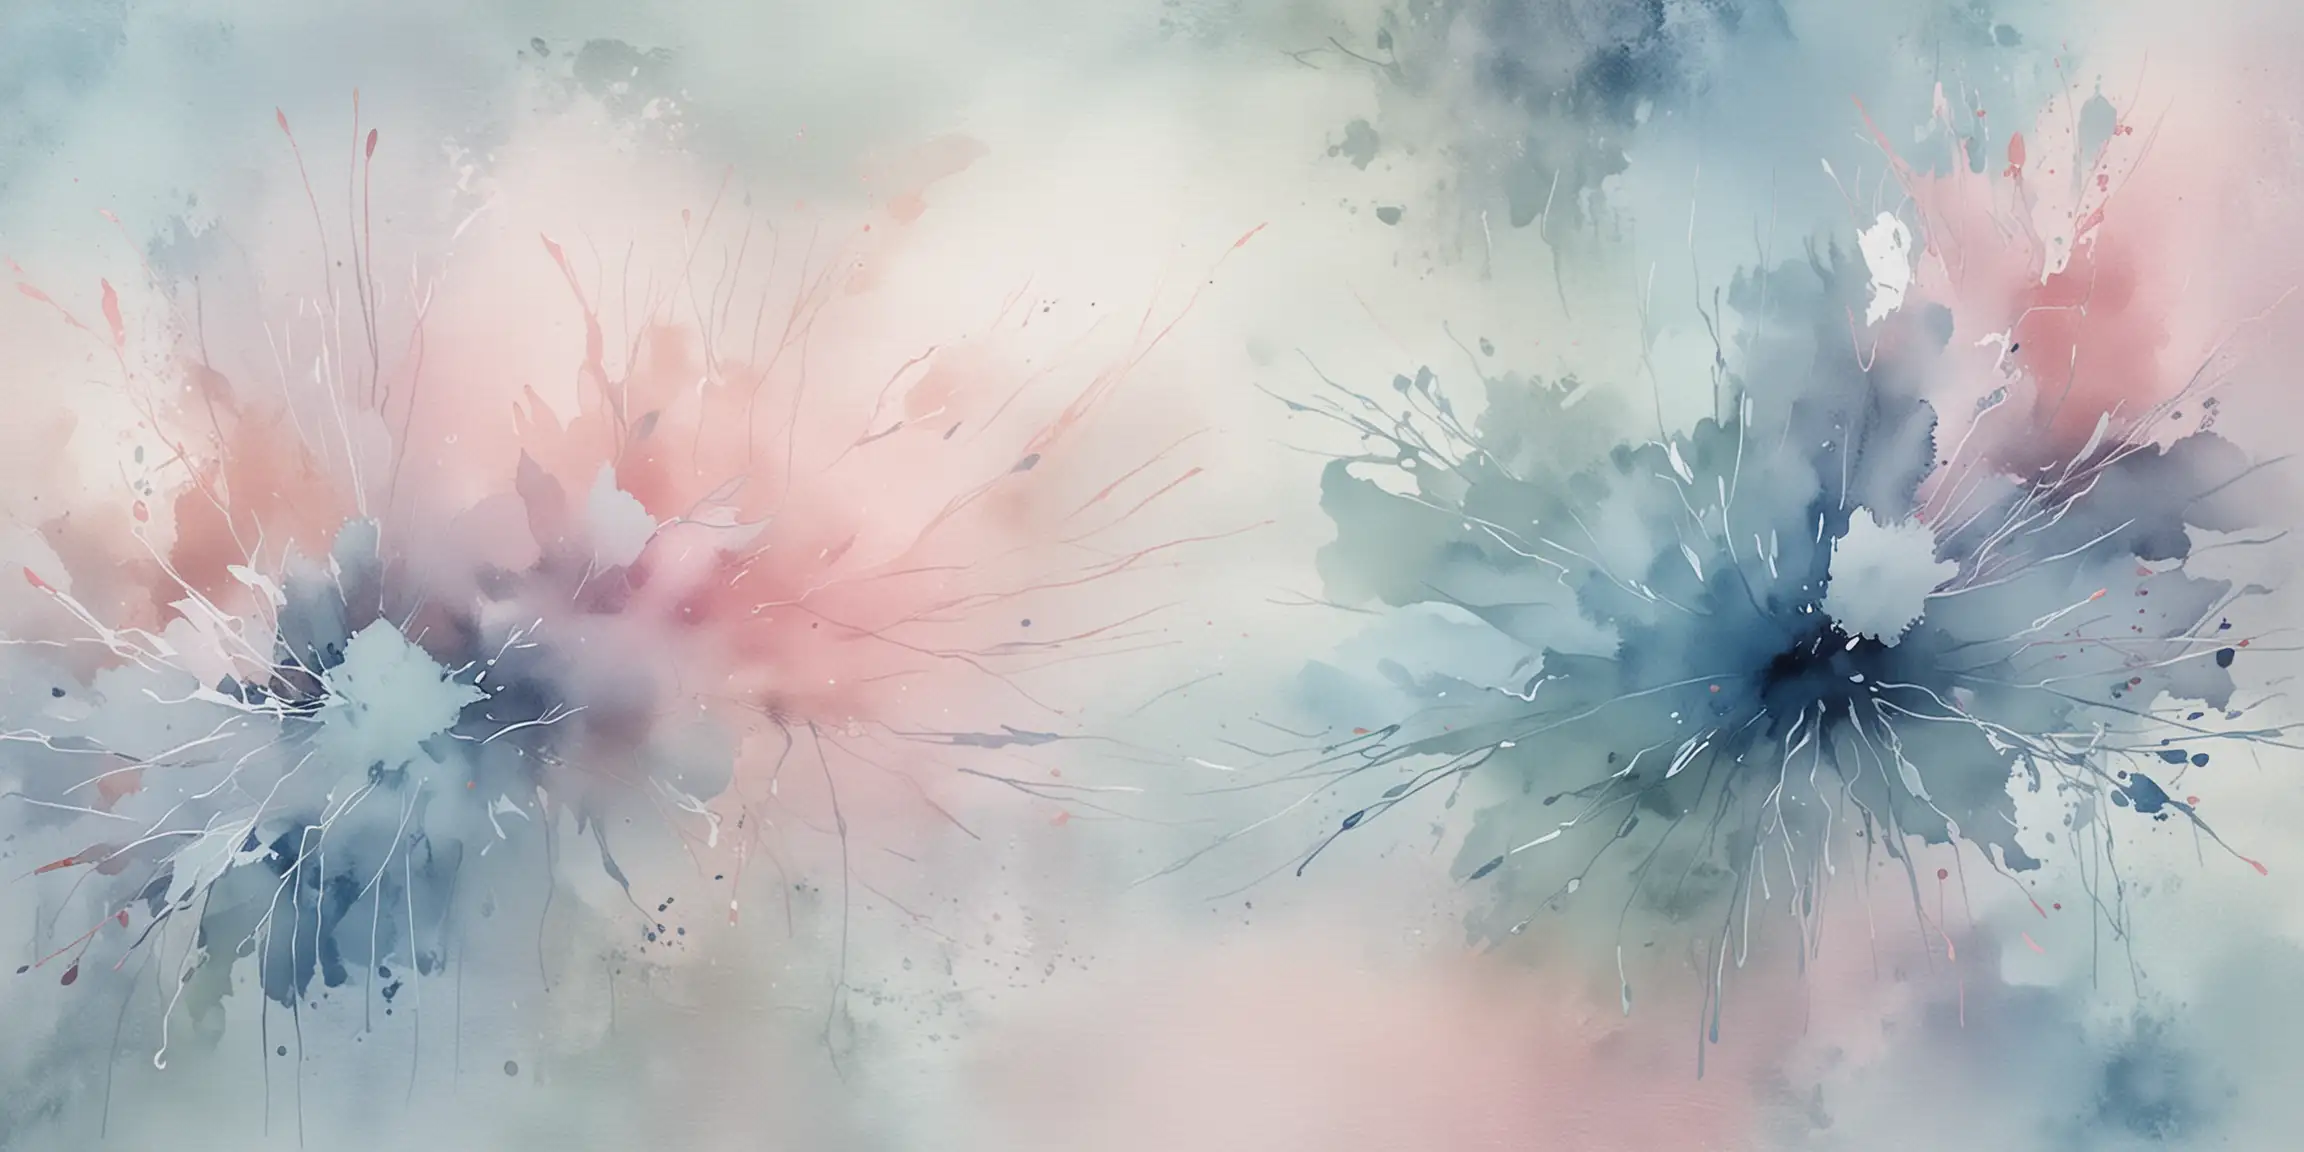 abstract painting with soft blues and soft pinks in a watercolour style in the background